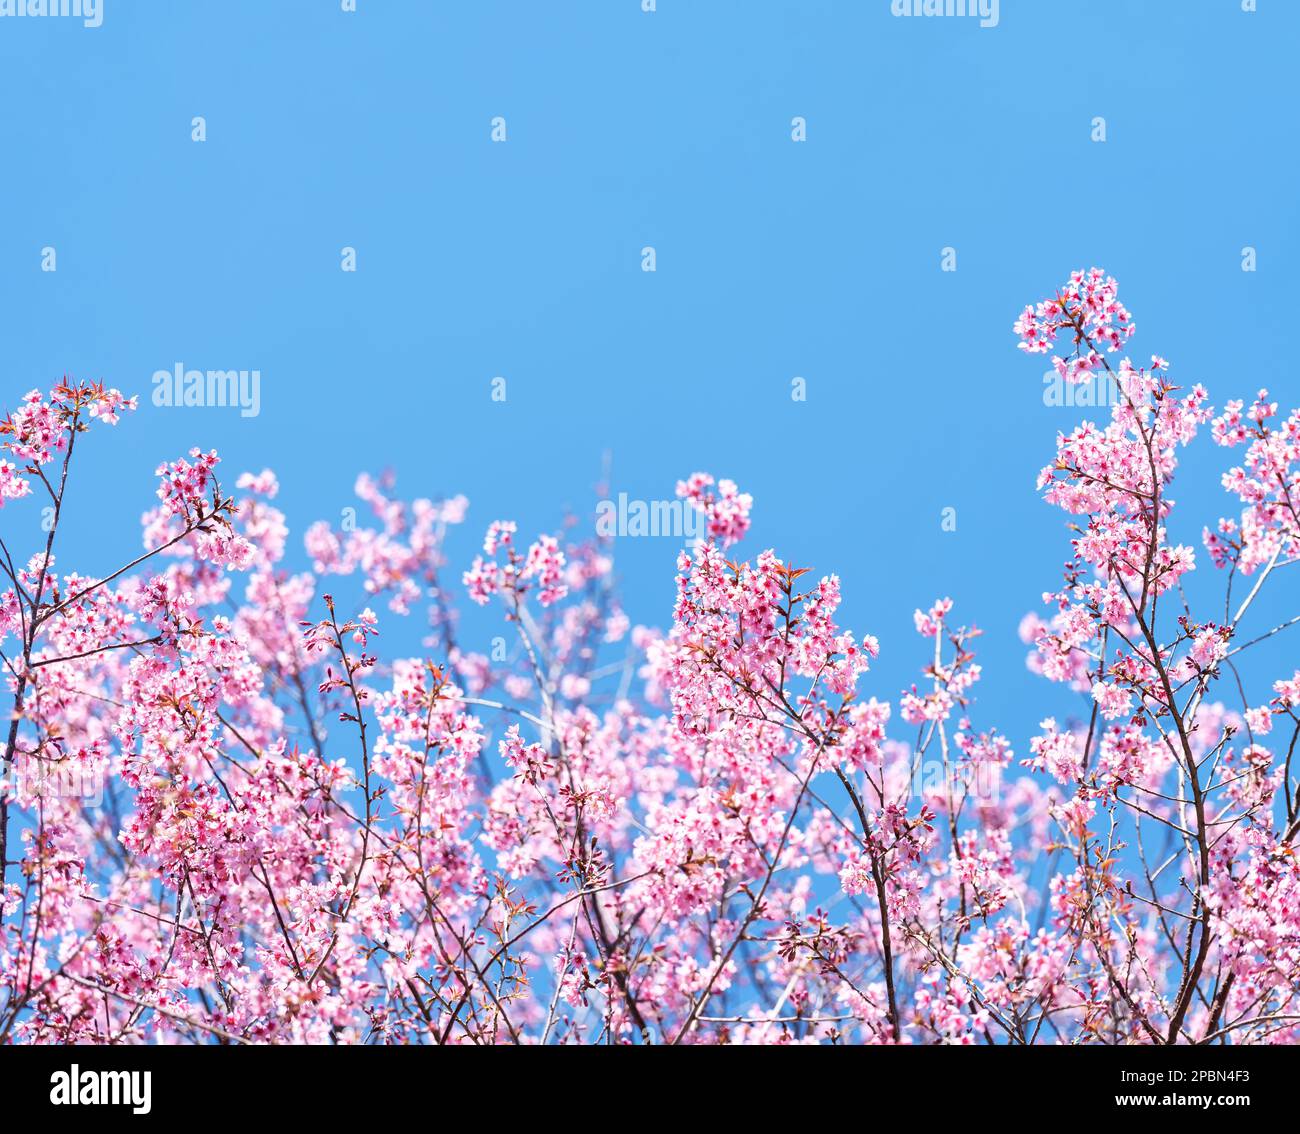 Pink blossom with blue sky background. Branches of wild Himalayan cherry (Prunus cerasoides) with vibrant pink cherry blossoms on their branches on bl Stock Photo